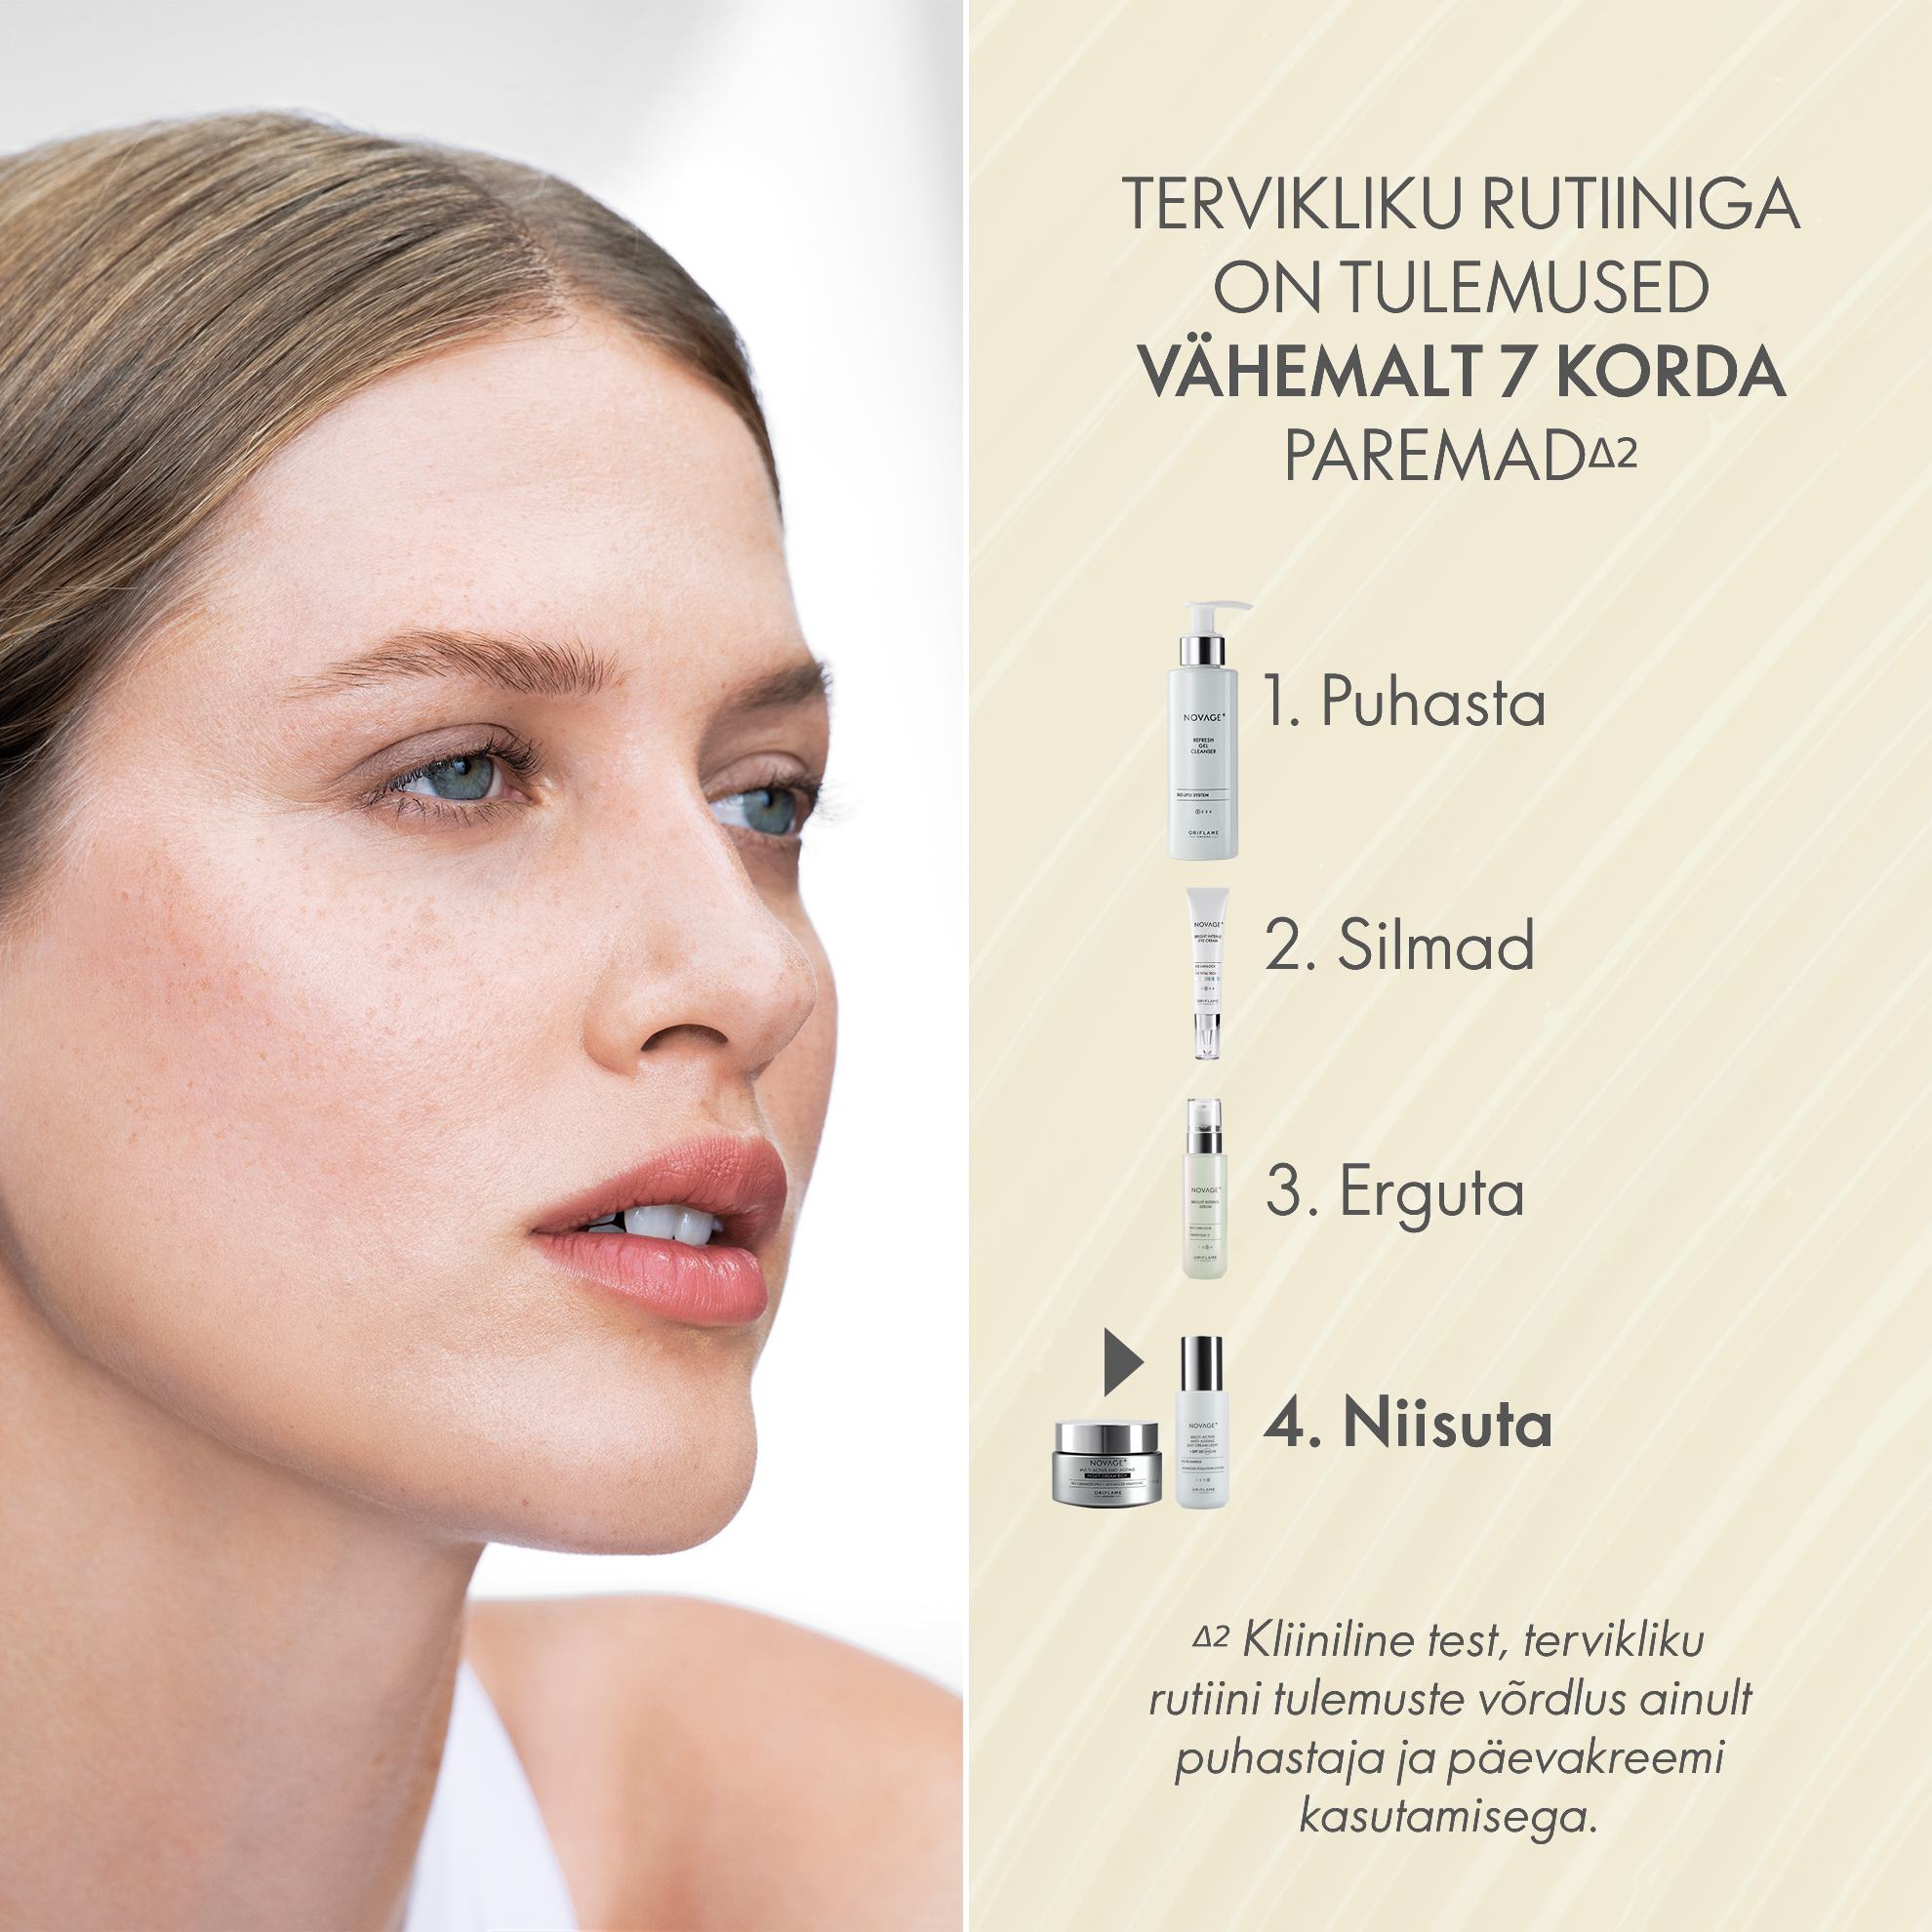 https://media-cdn.oriflame.com/productImage?externalMediaId=product-management-media%2fProducts%2f41044%2fEE%2f41044_4.png&id=17586363&version=1